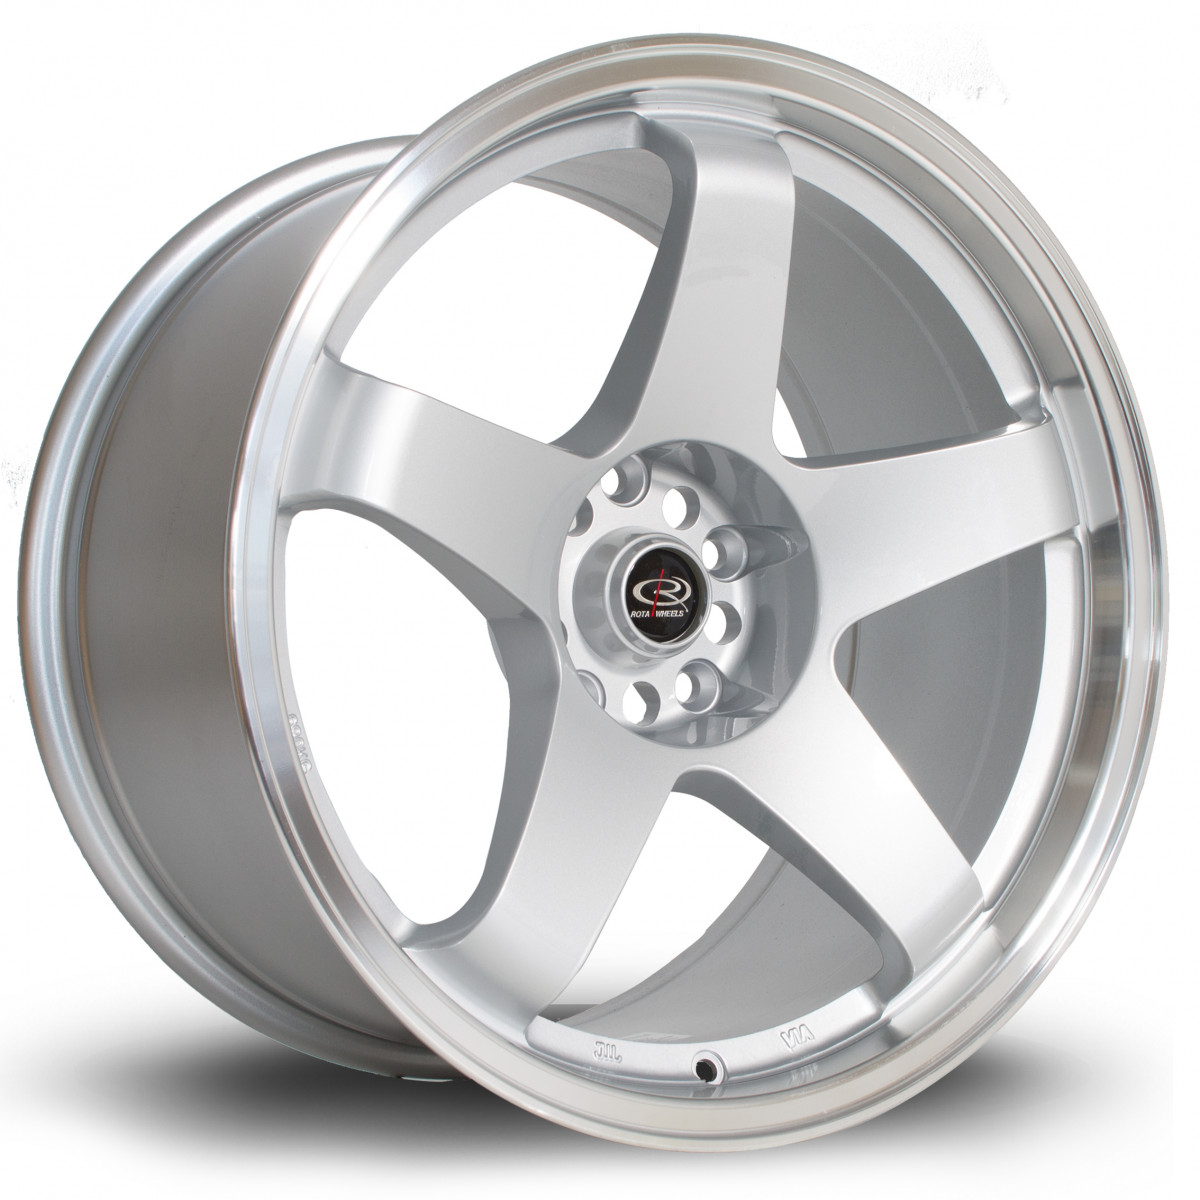 GTR 18x9.5 5x114 ET30 Silver with Polished Lip